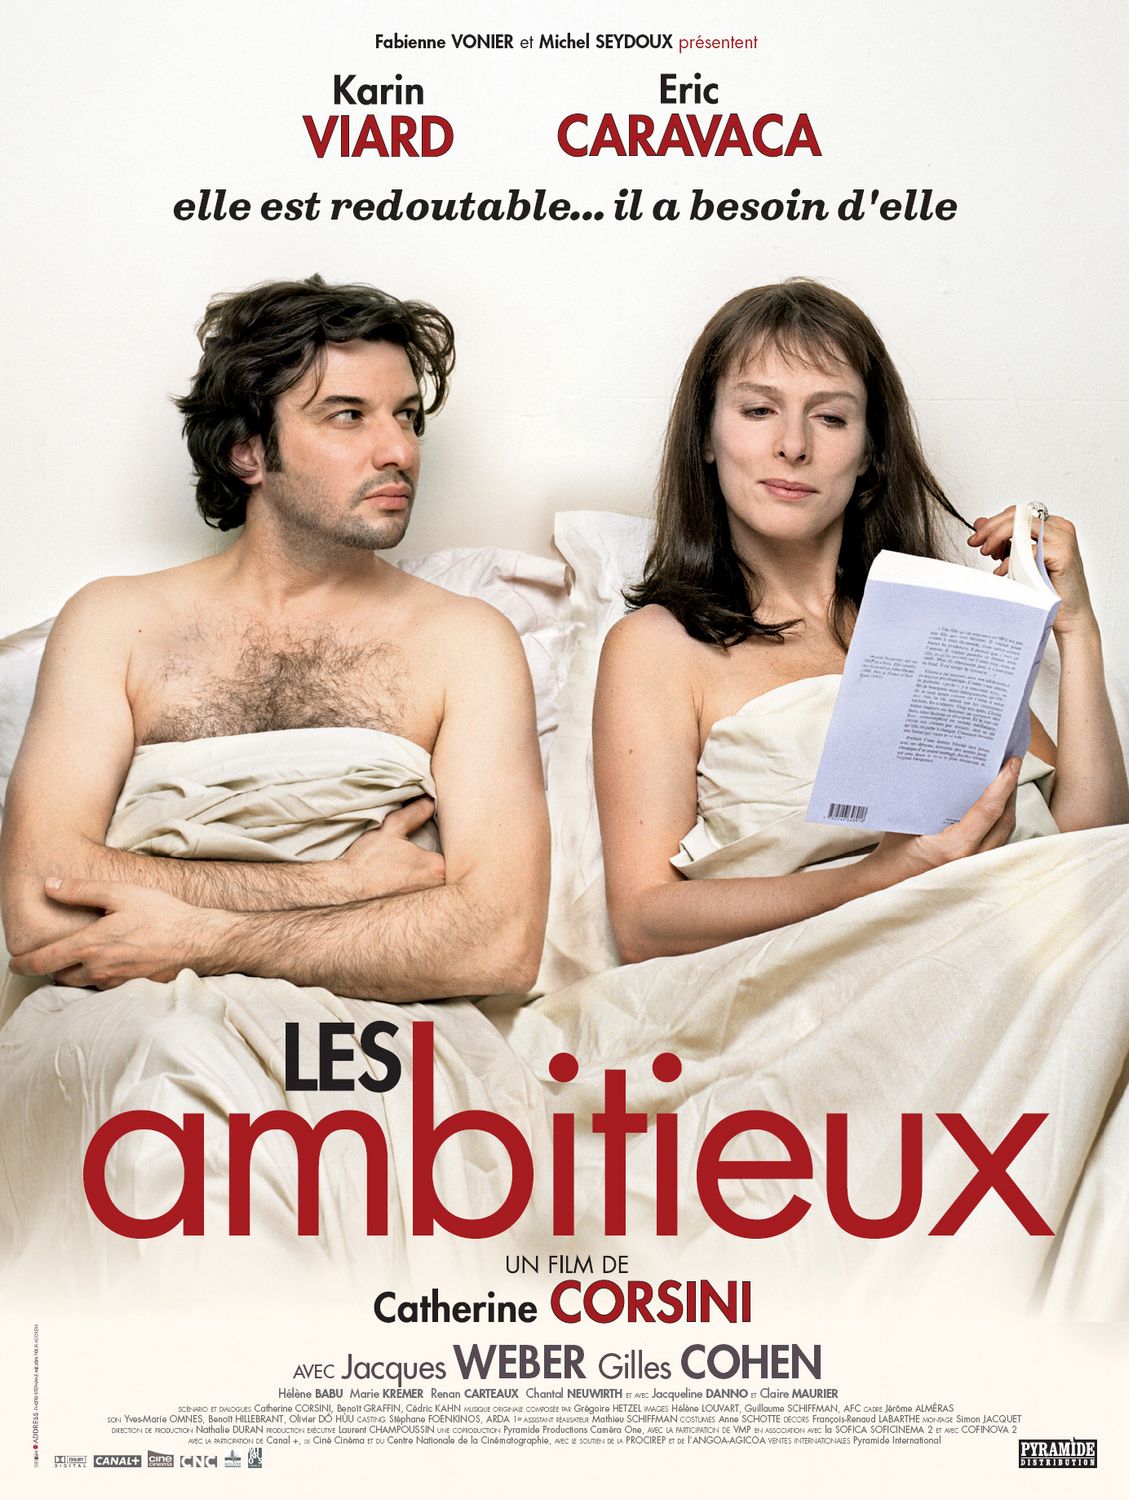 Extra Large Movie Poster Image for Ambitieux, Les 